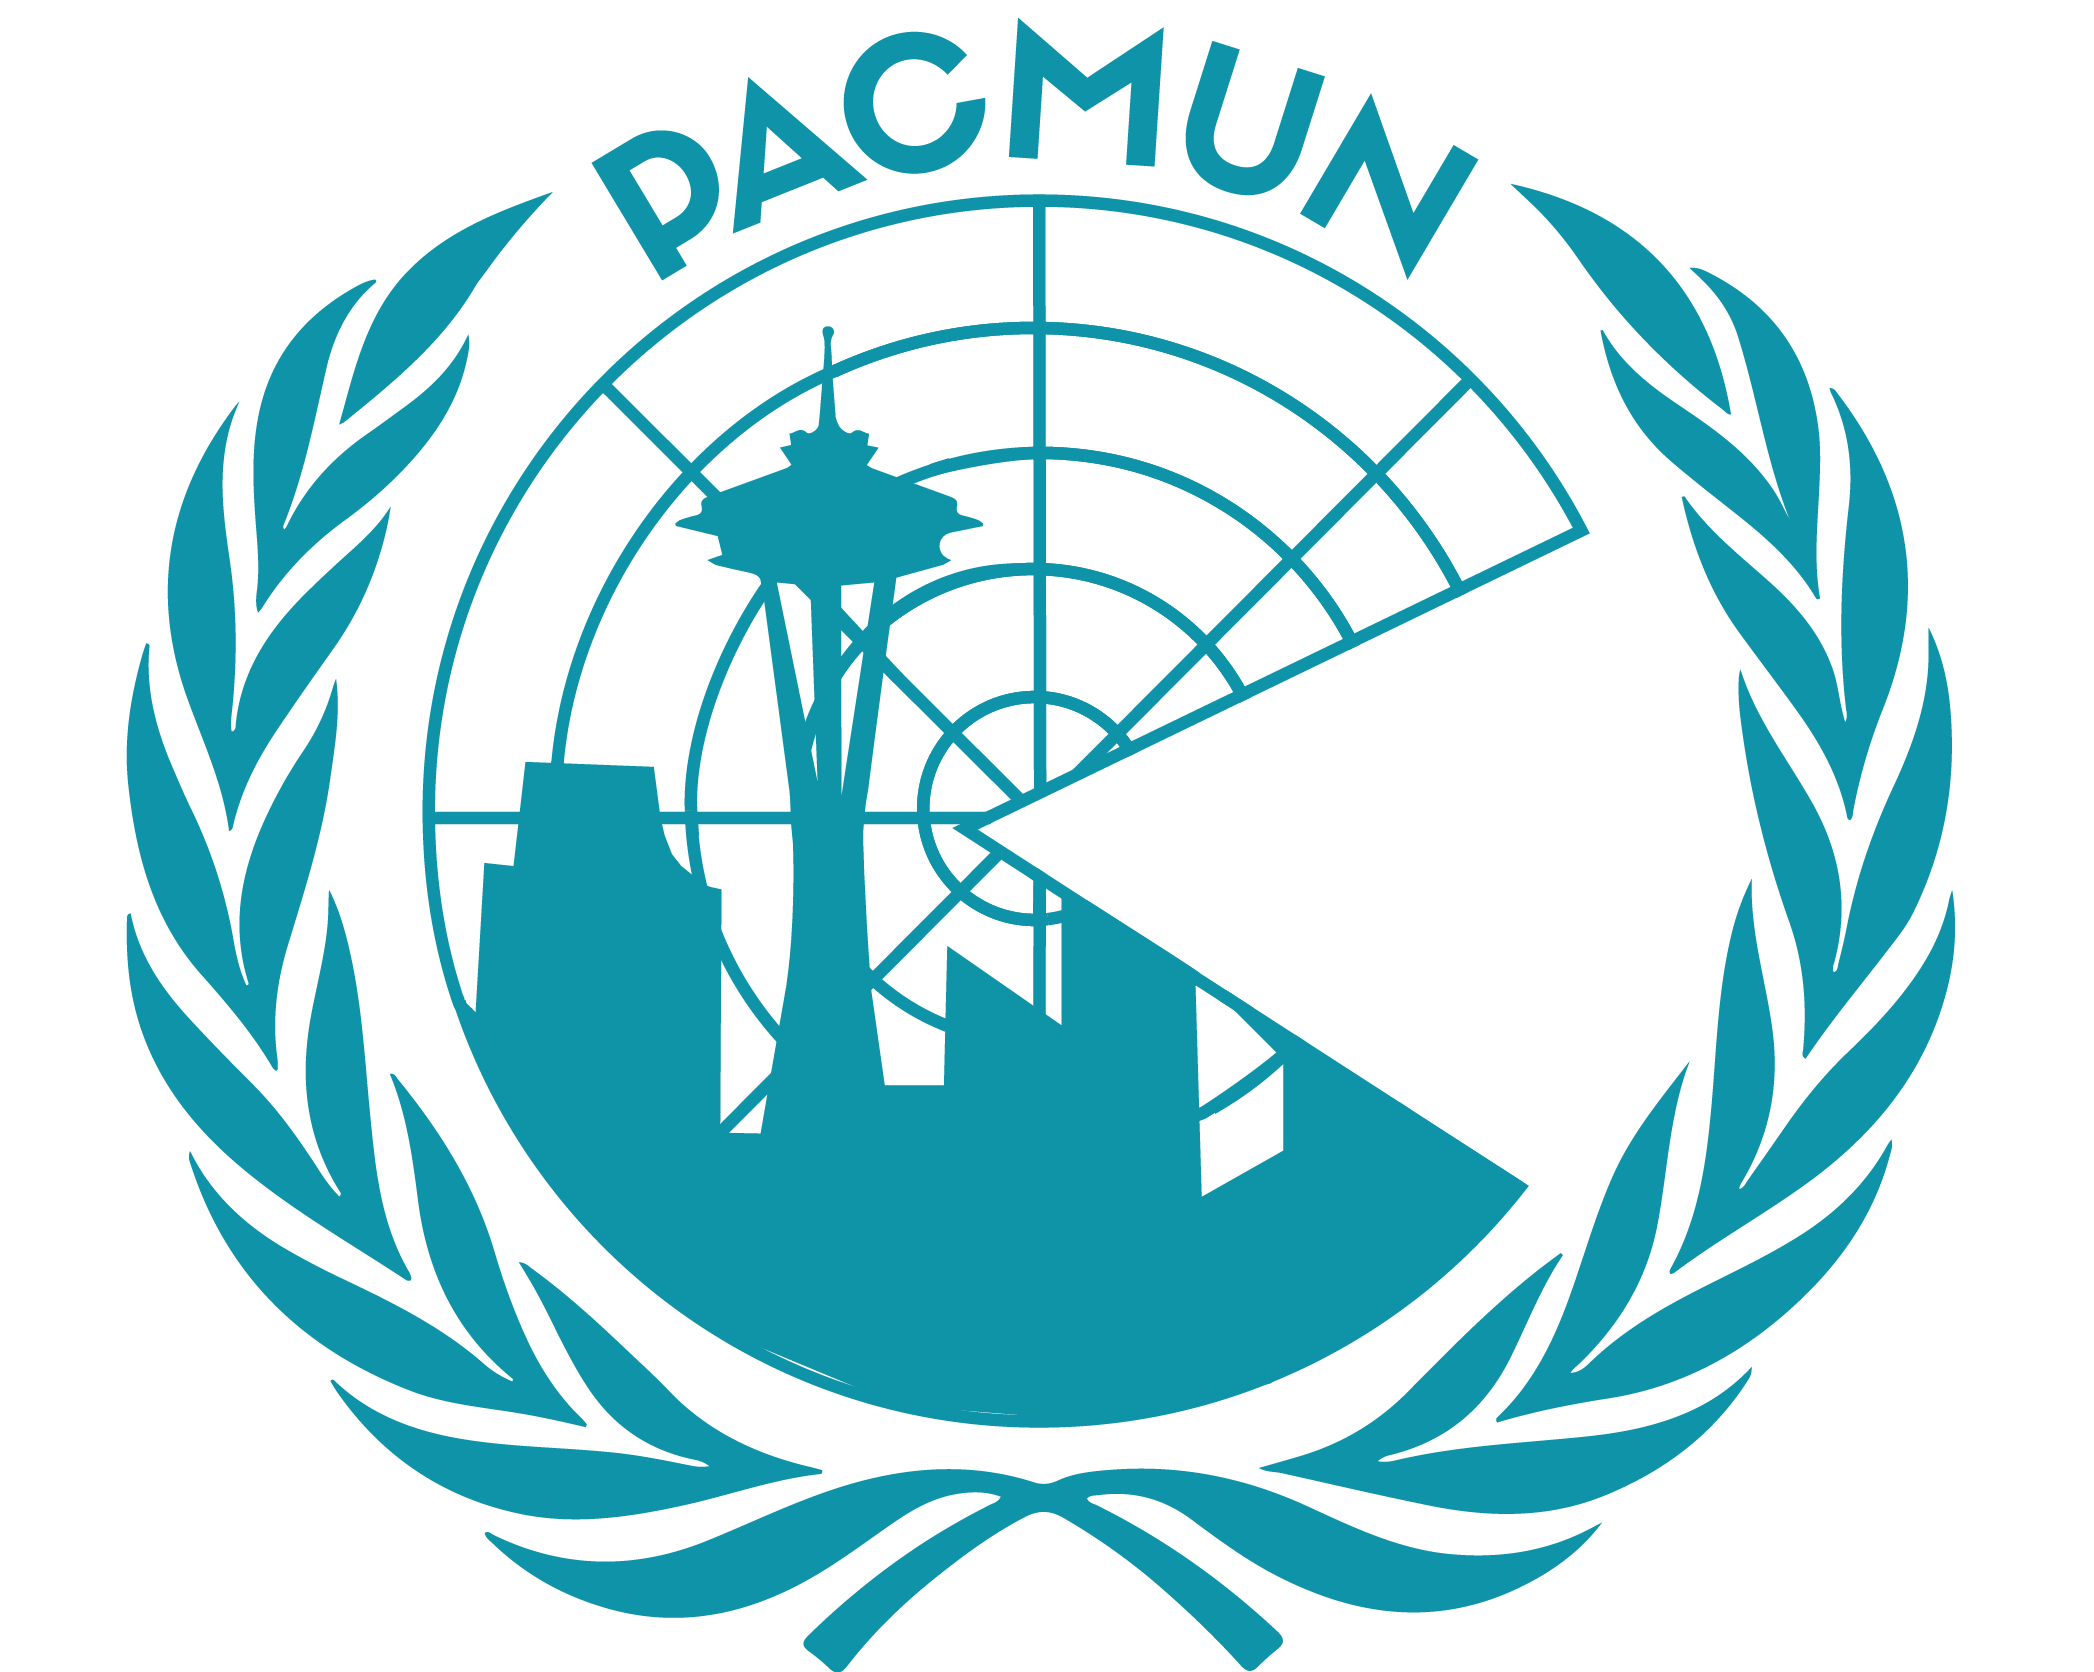 Pacific Northwest Model United Nations conference